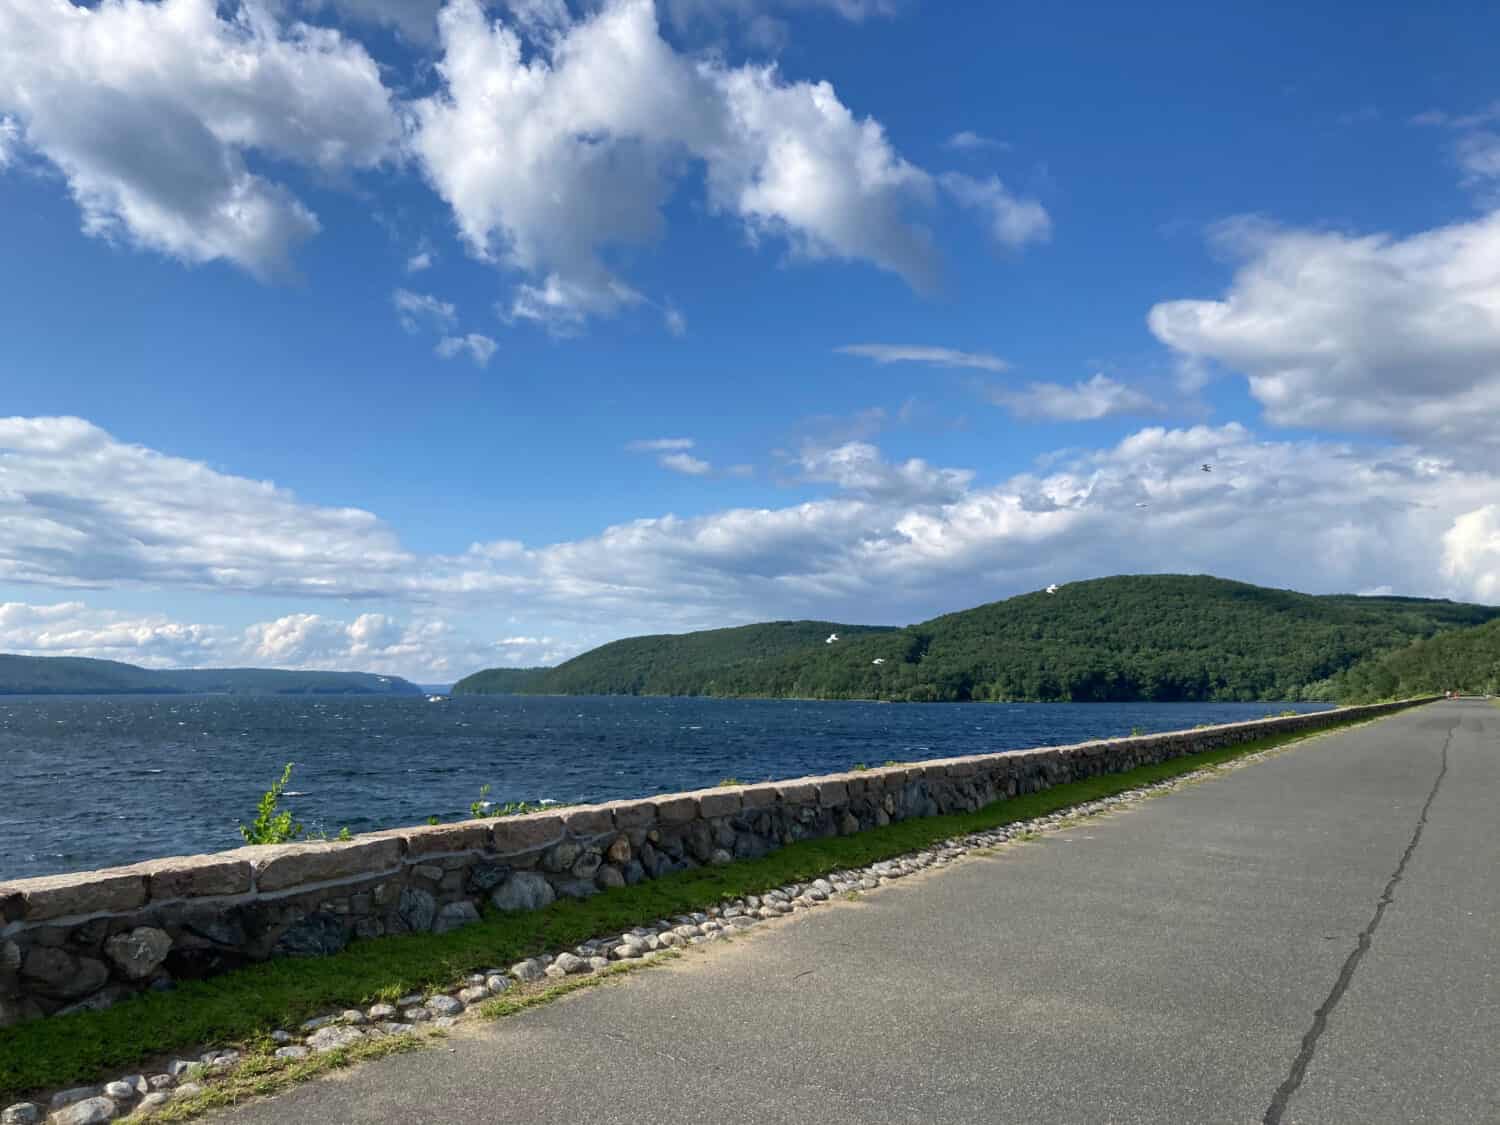 Beautiful summer day at the Quabbin Reservoir Windsor Dam with puffy clouds in the blue sky, rippling calm waves in the water, and a peaceful walkway lined with an old stone wall. Selective focus.